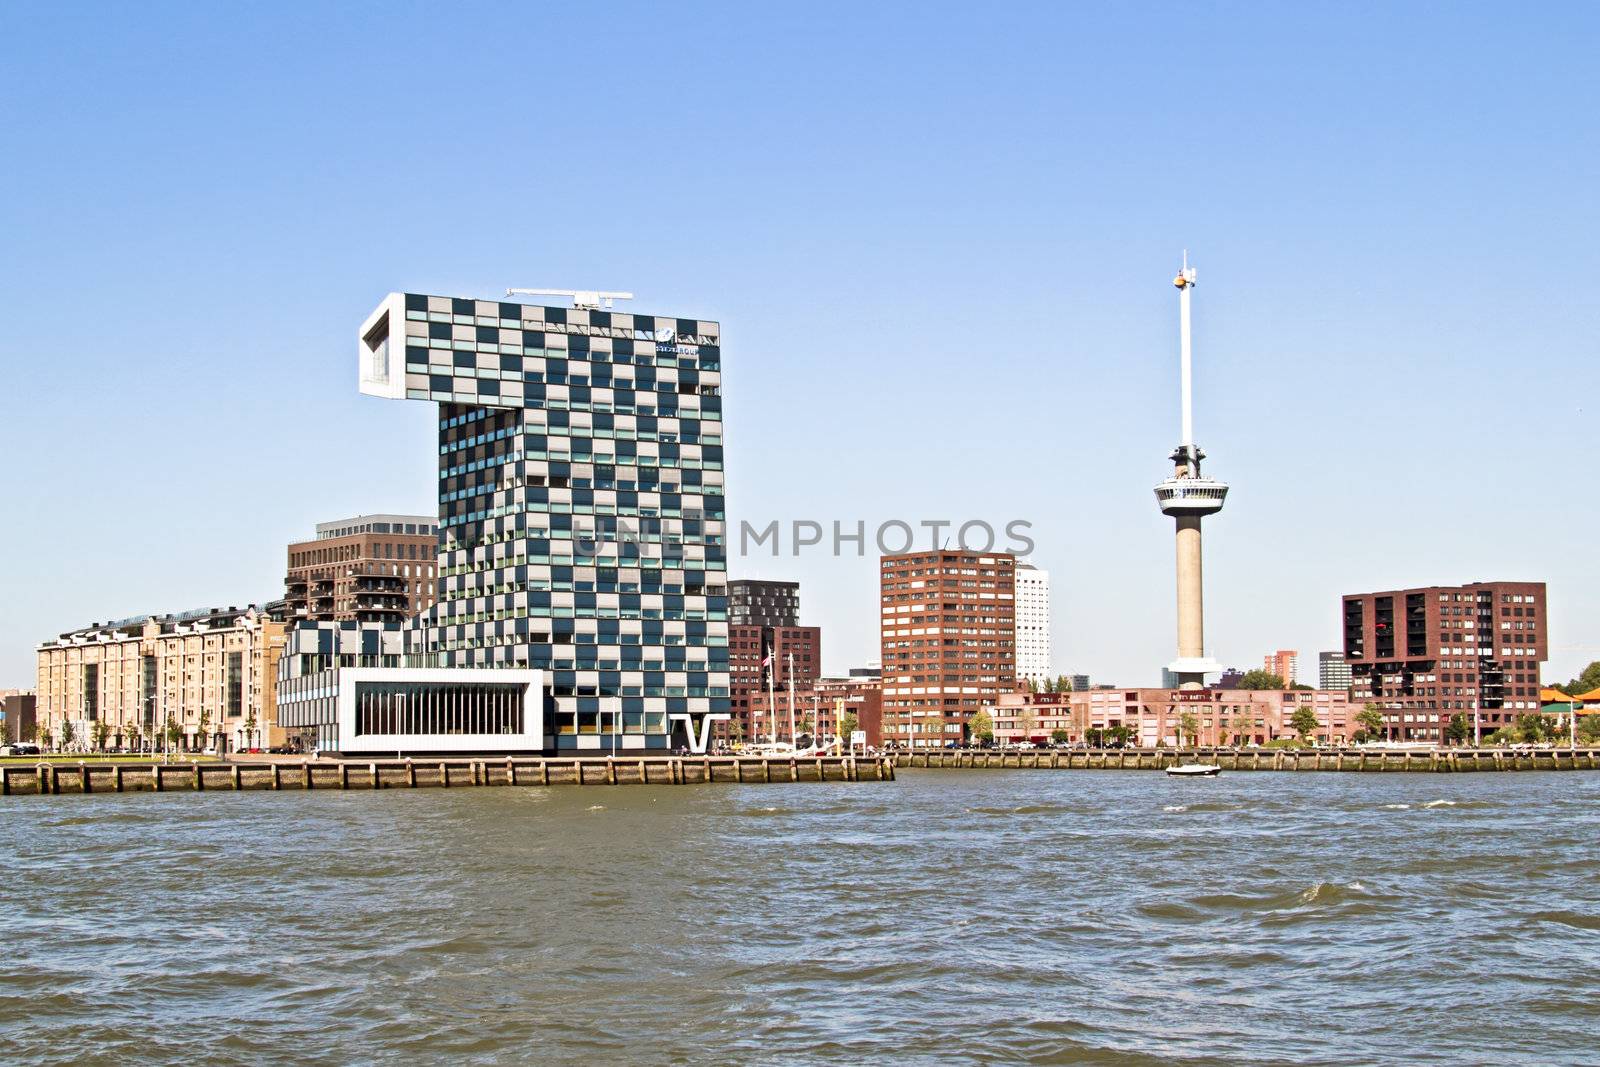 City scenic from Rotterdam in the Netherlands